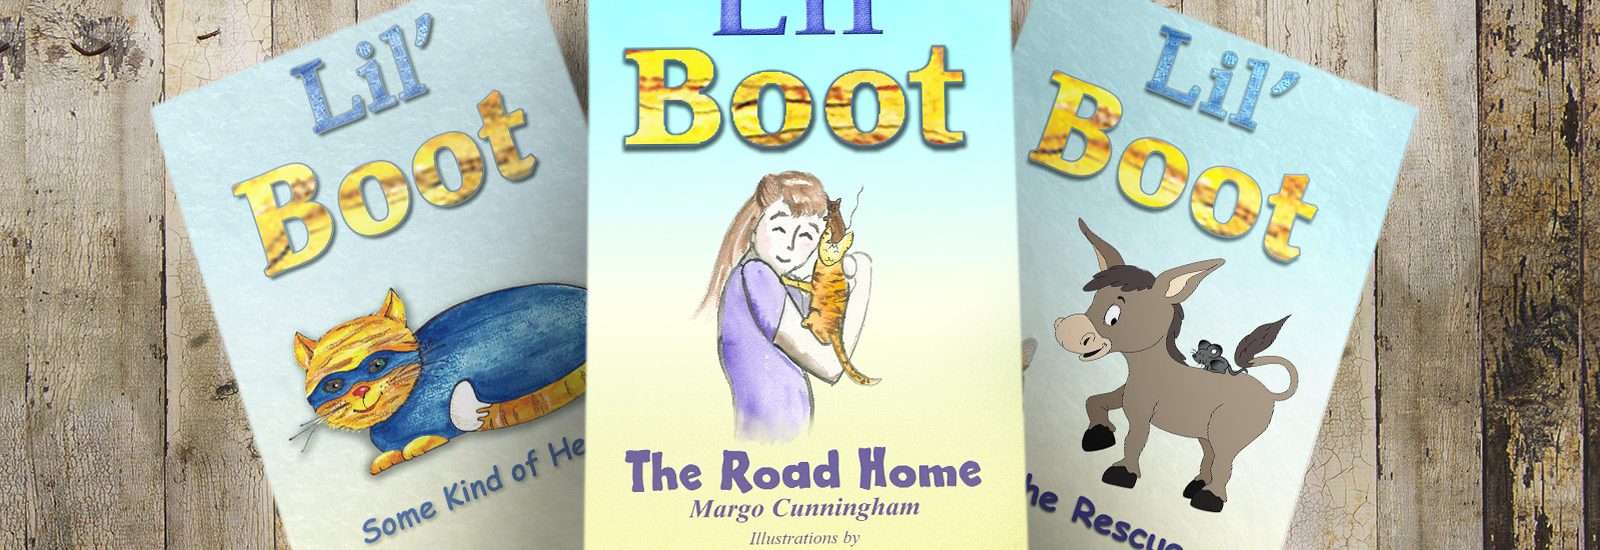 Lil' Boot